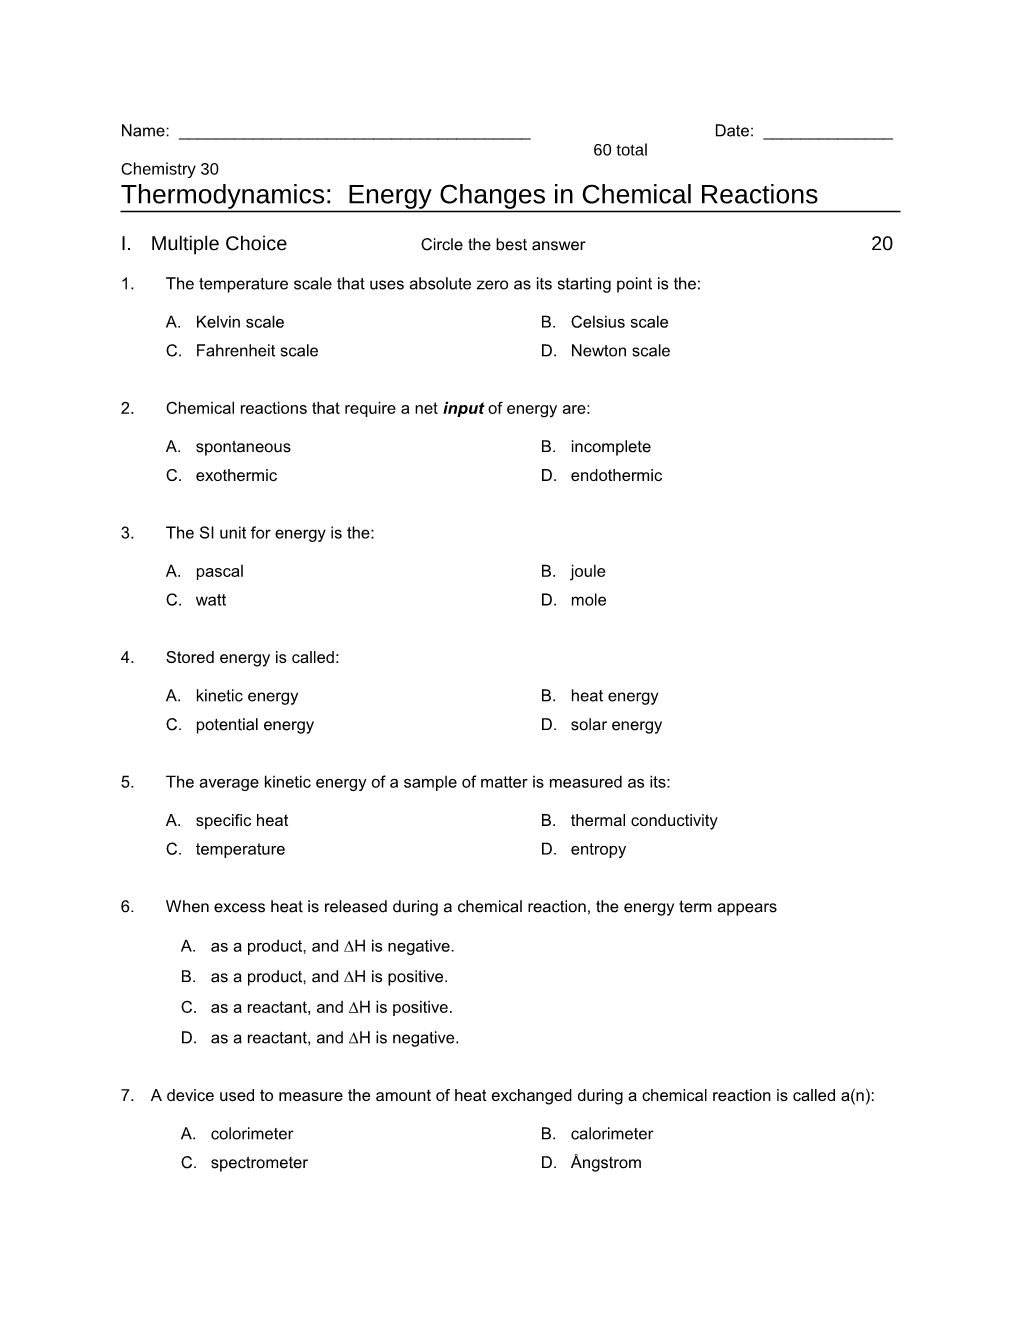 Thermodynamics: Energy Changes in Chemical Reactions